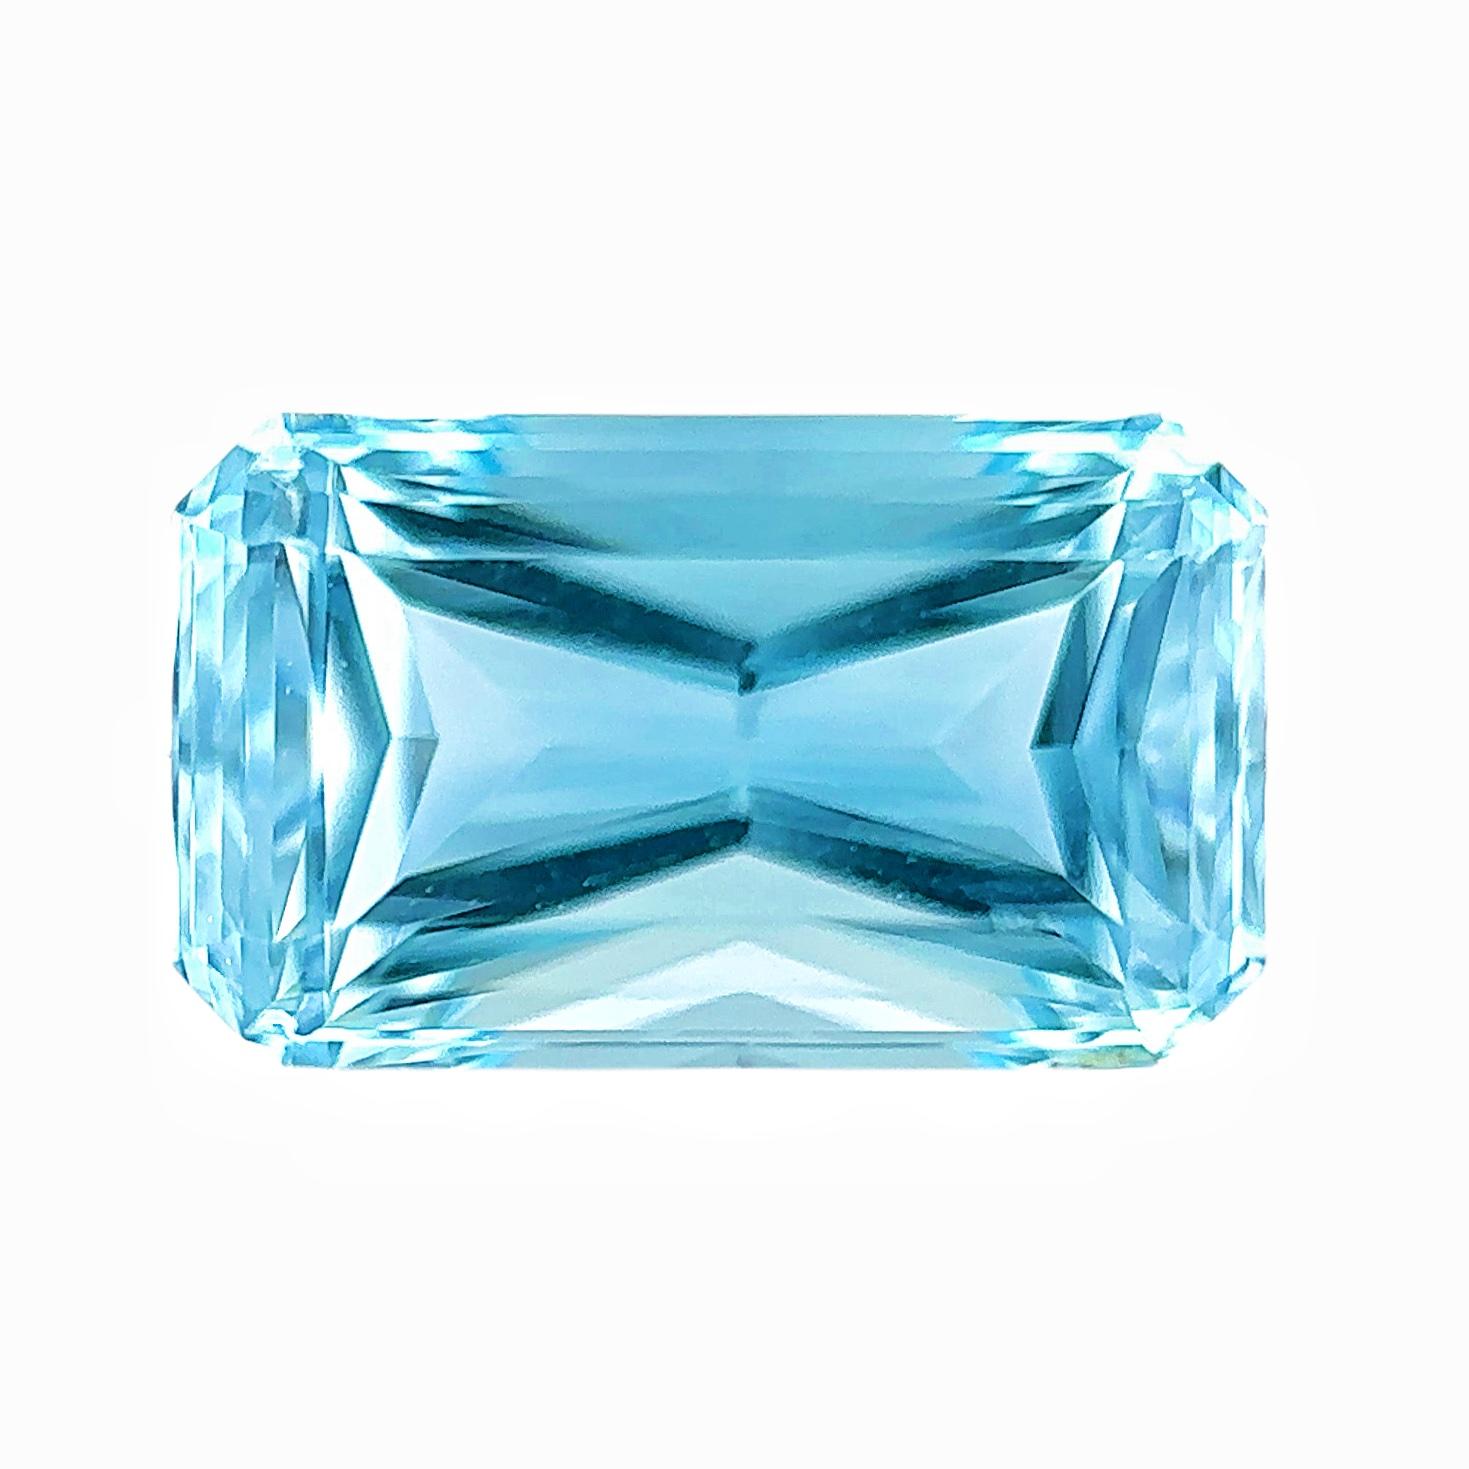 2.59 Carat Natural Aquamarine Loose Stone

Appointed lab certificate can be arranged upon request

This Item is ideal for your design as an engagement ring, cocktail ring, necklace, bracelet, etc.


ABOUT US

Xuelai Jewellery London is a